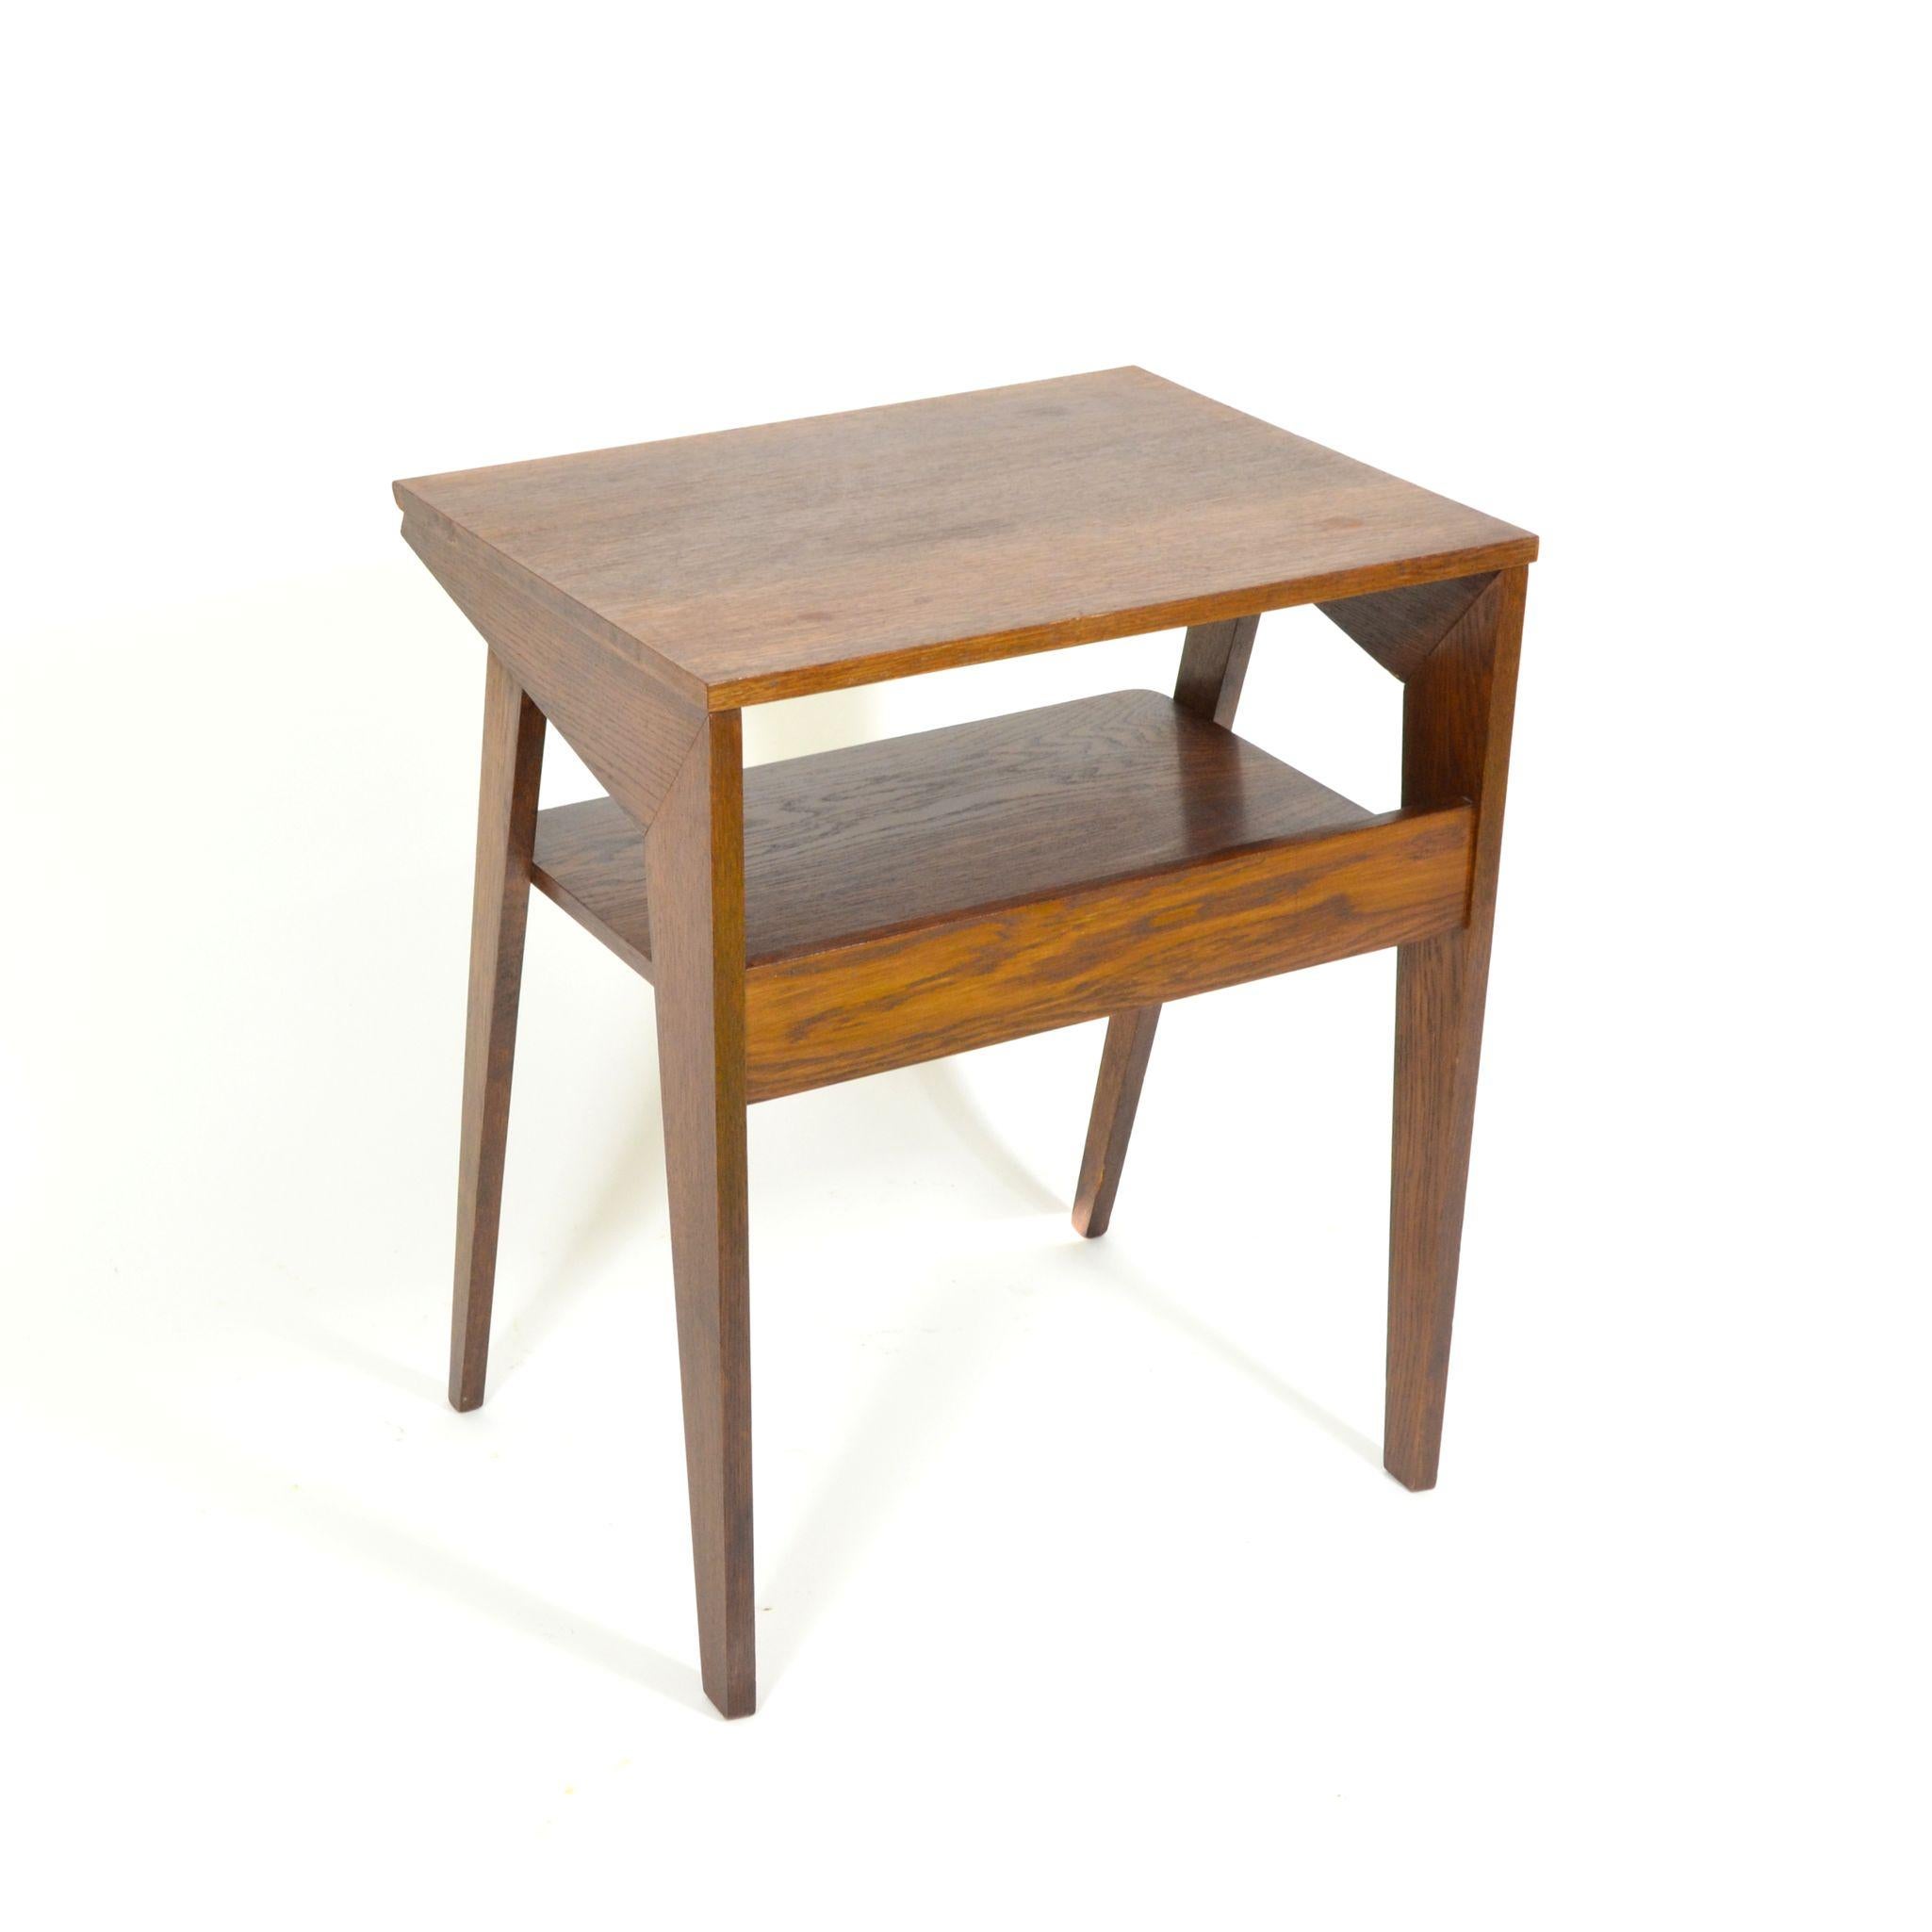 Darked Stained Oak Side Table, 1970s For Sale 3